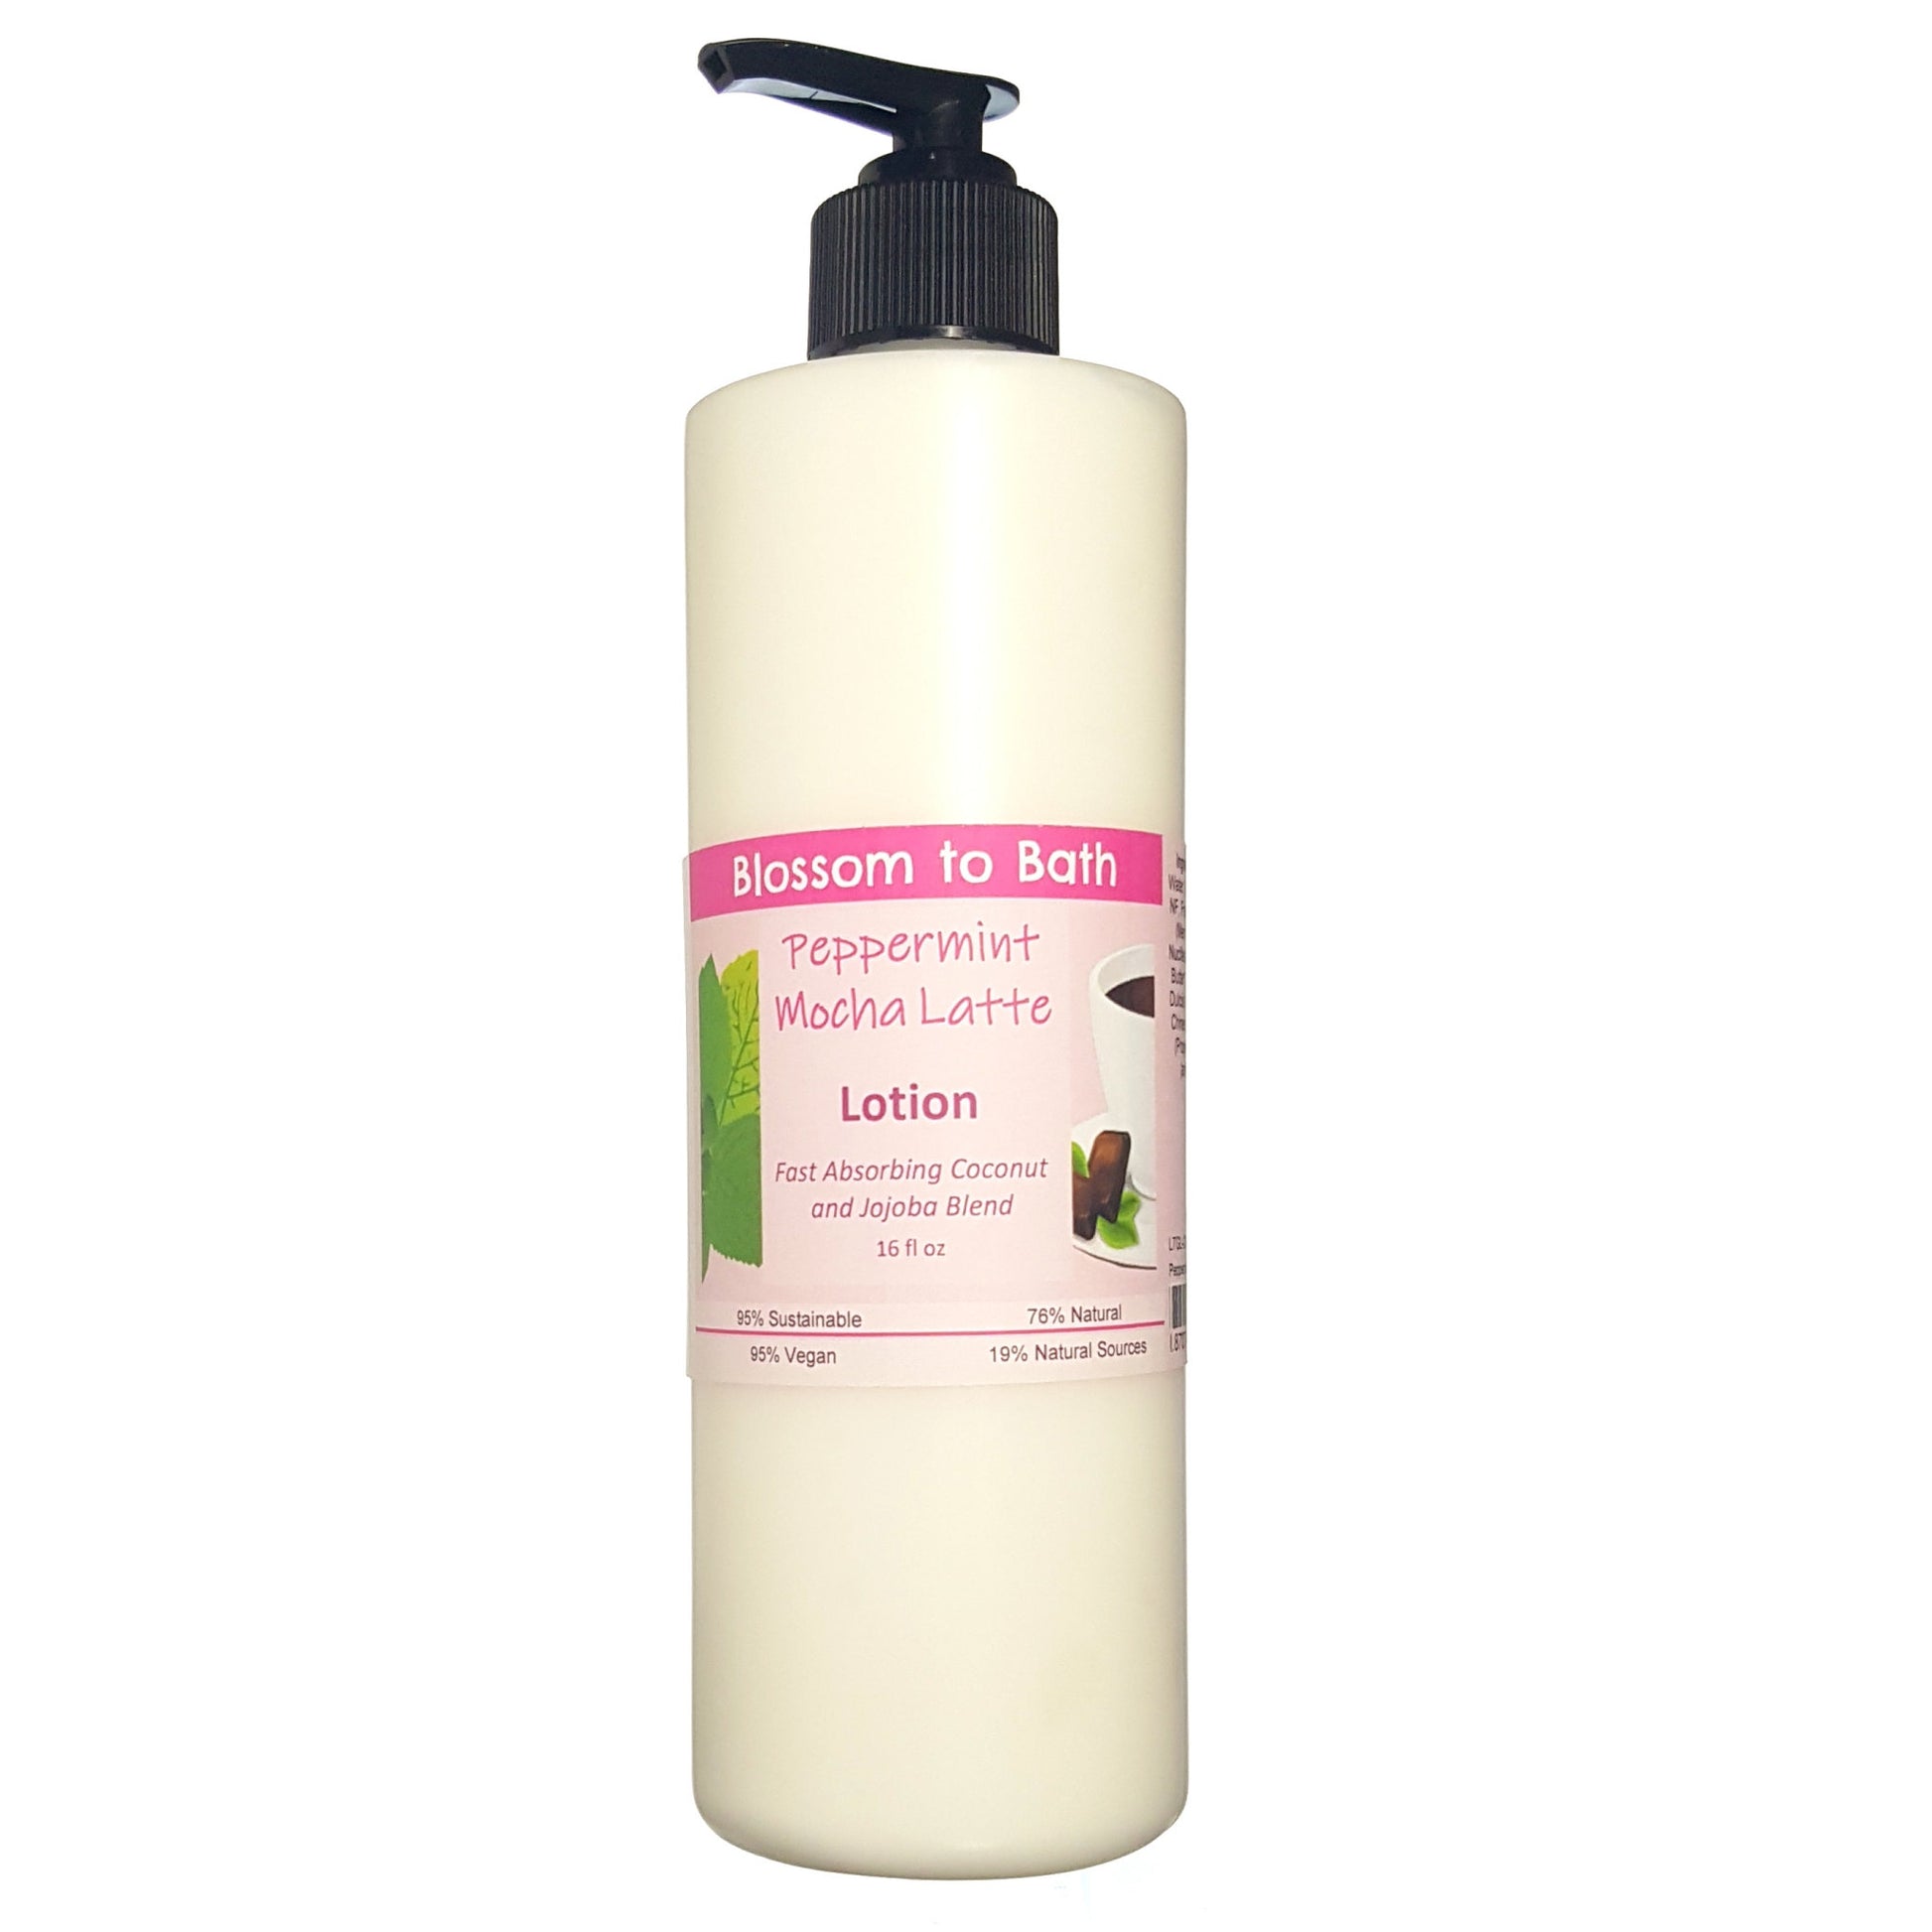 Buy Blossom to Bath Peppermint Mocha Latte Lotion from Flowersong Soap Studio.  Daily moisture luxury that soaks in quickly made with organic oils and butters that soften and smooth the skin  A confectionary blend of fresh mint, rich fudge, and coffee.